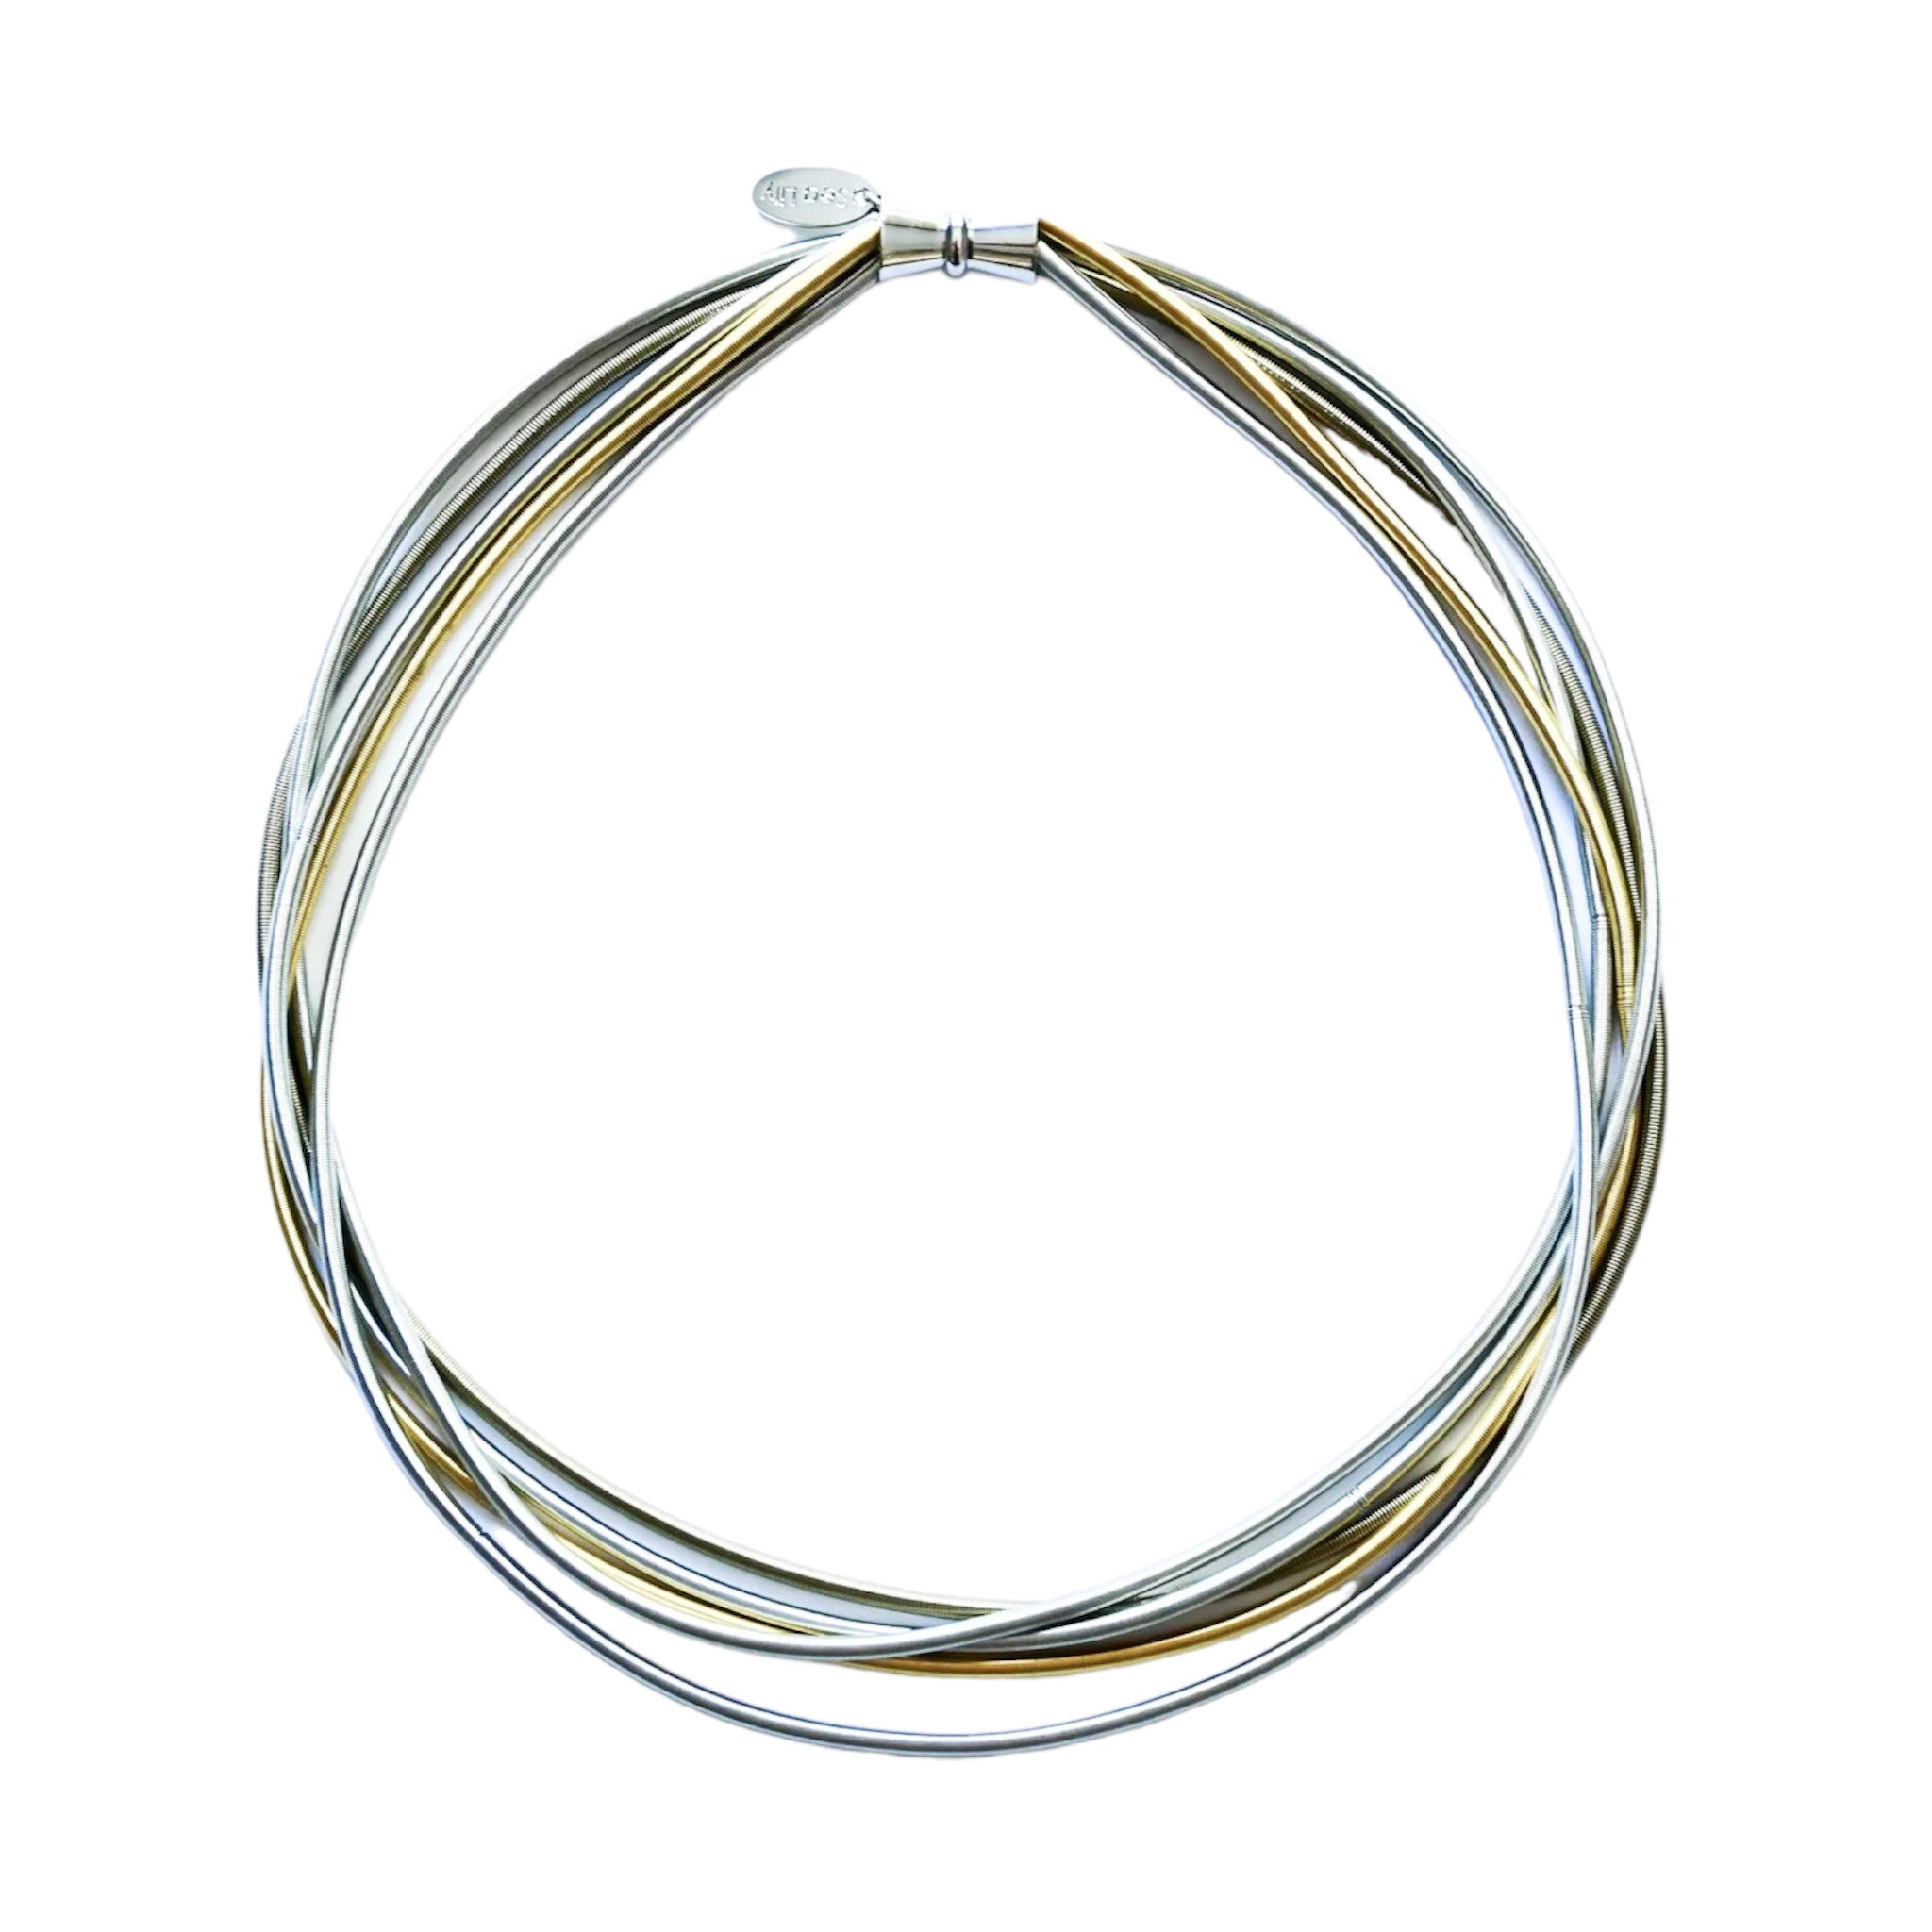 Long Piano Wire and Slate Ring Necklace - ShopperBoard